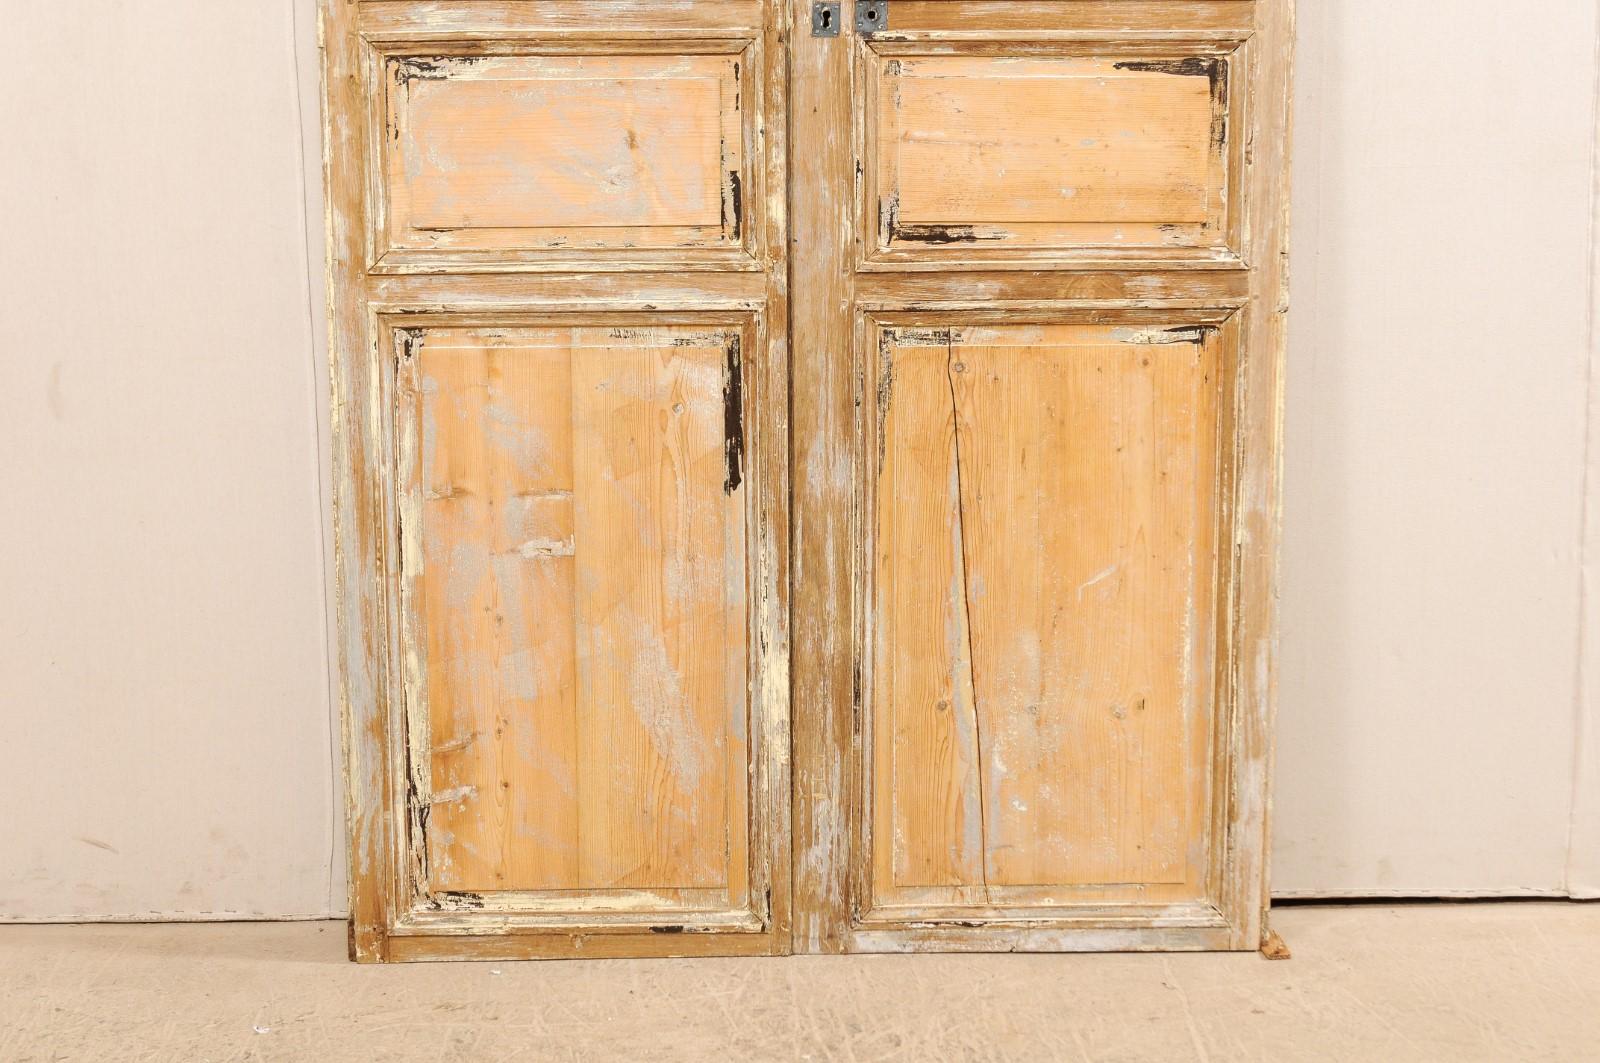 Pair of 19th Century French Painted Wood Doors with Lovely Cream Colored Finish 6